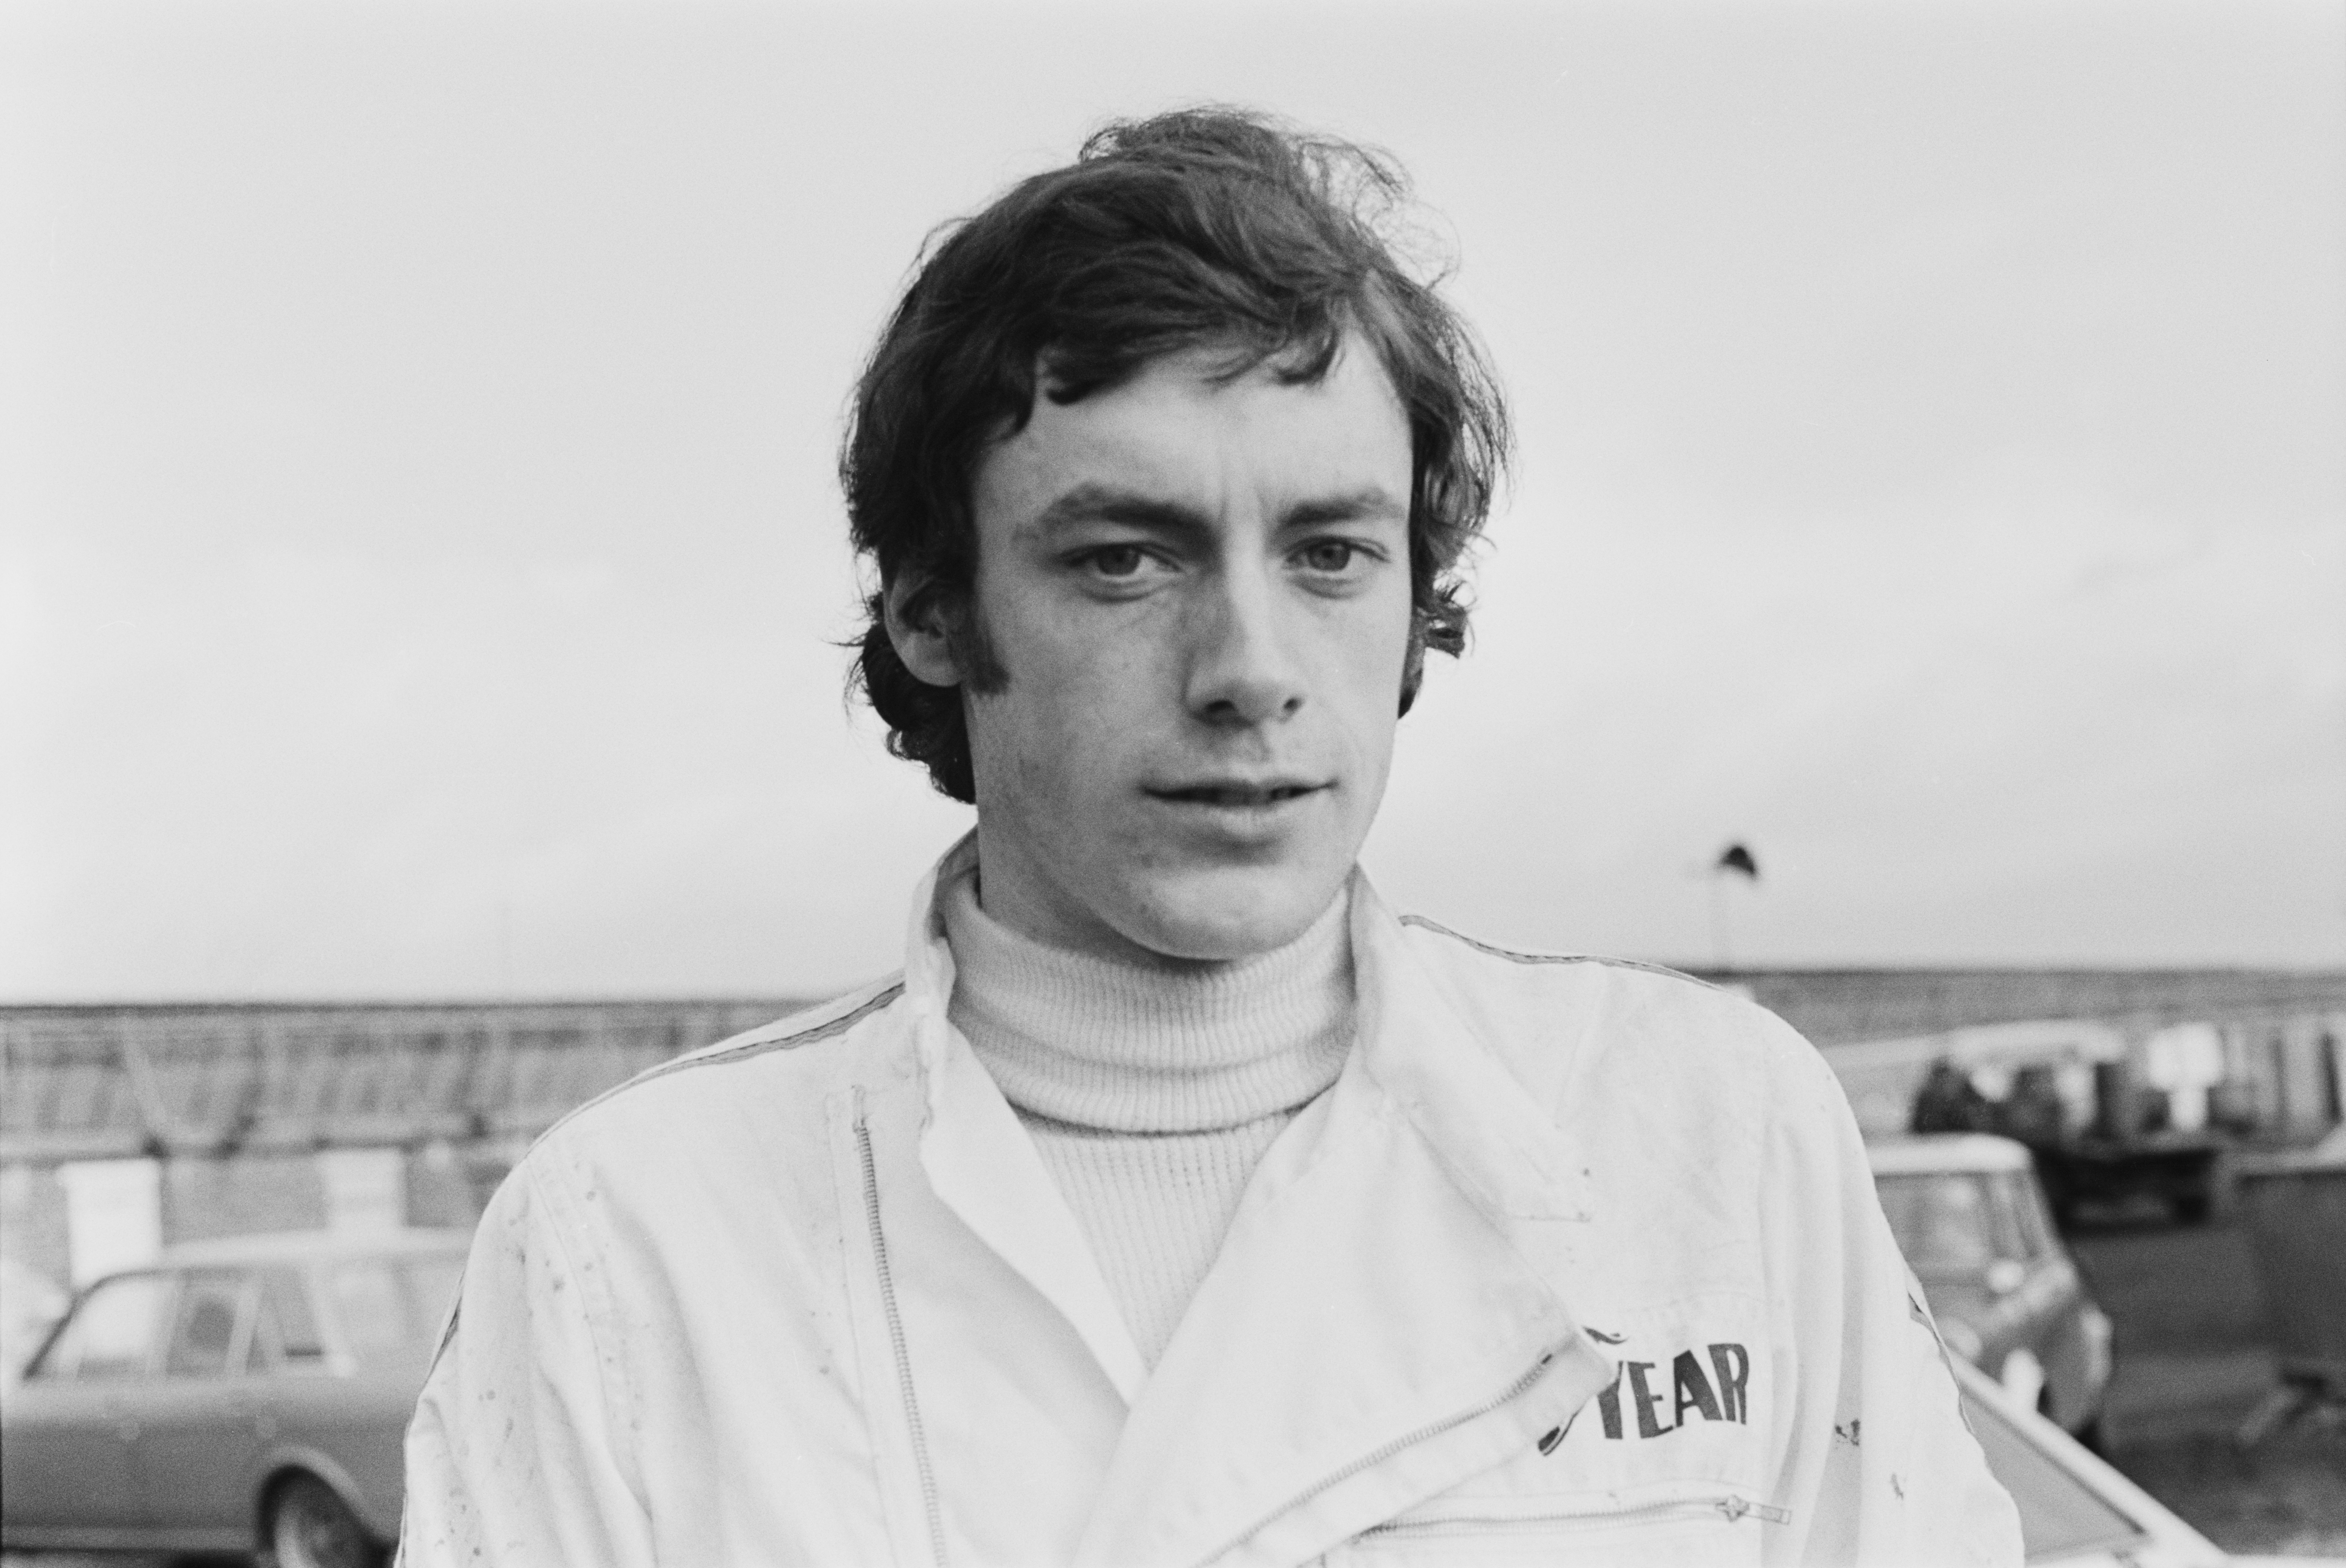 Racing driver Tom Pryce (1949-1977) during the Daily Express Crusader Championship in 1970